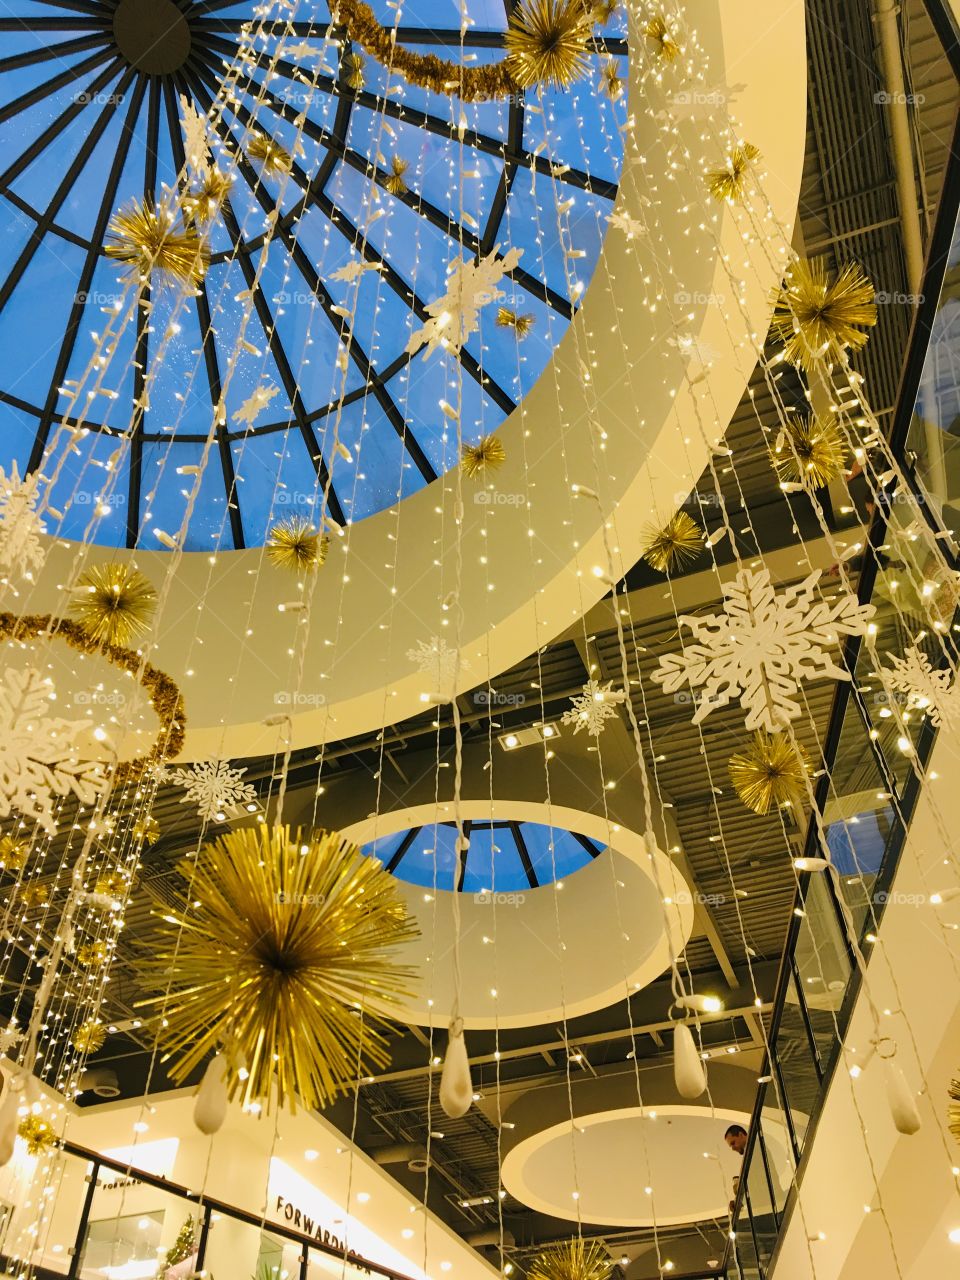 Skylight and snowflakes 